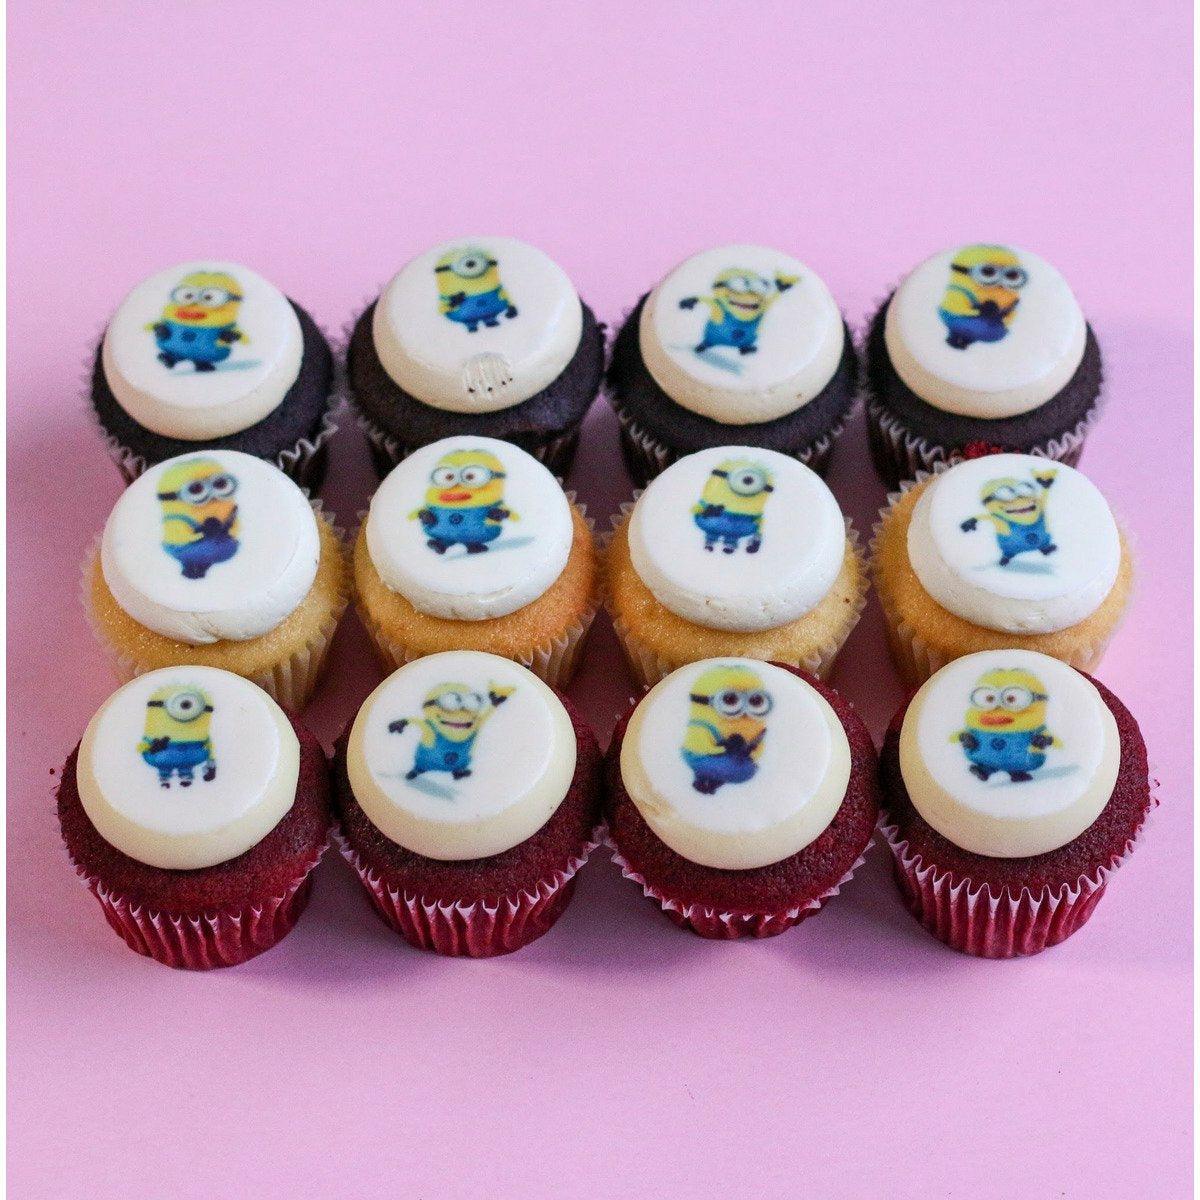 Minion Cake and Cupcakes | Despicable me cake and cupcakes f… | Flickr